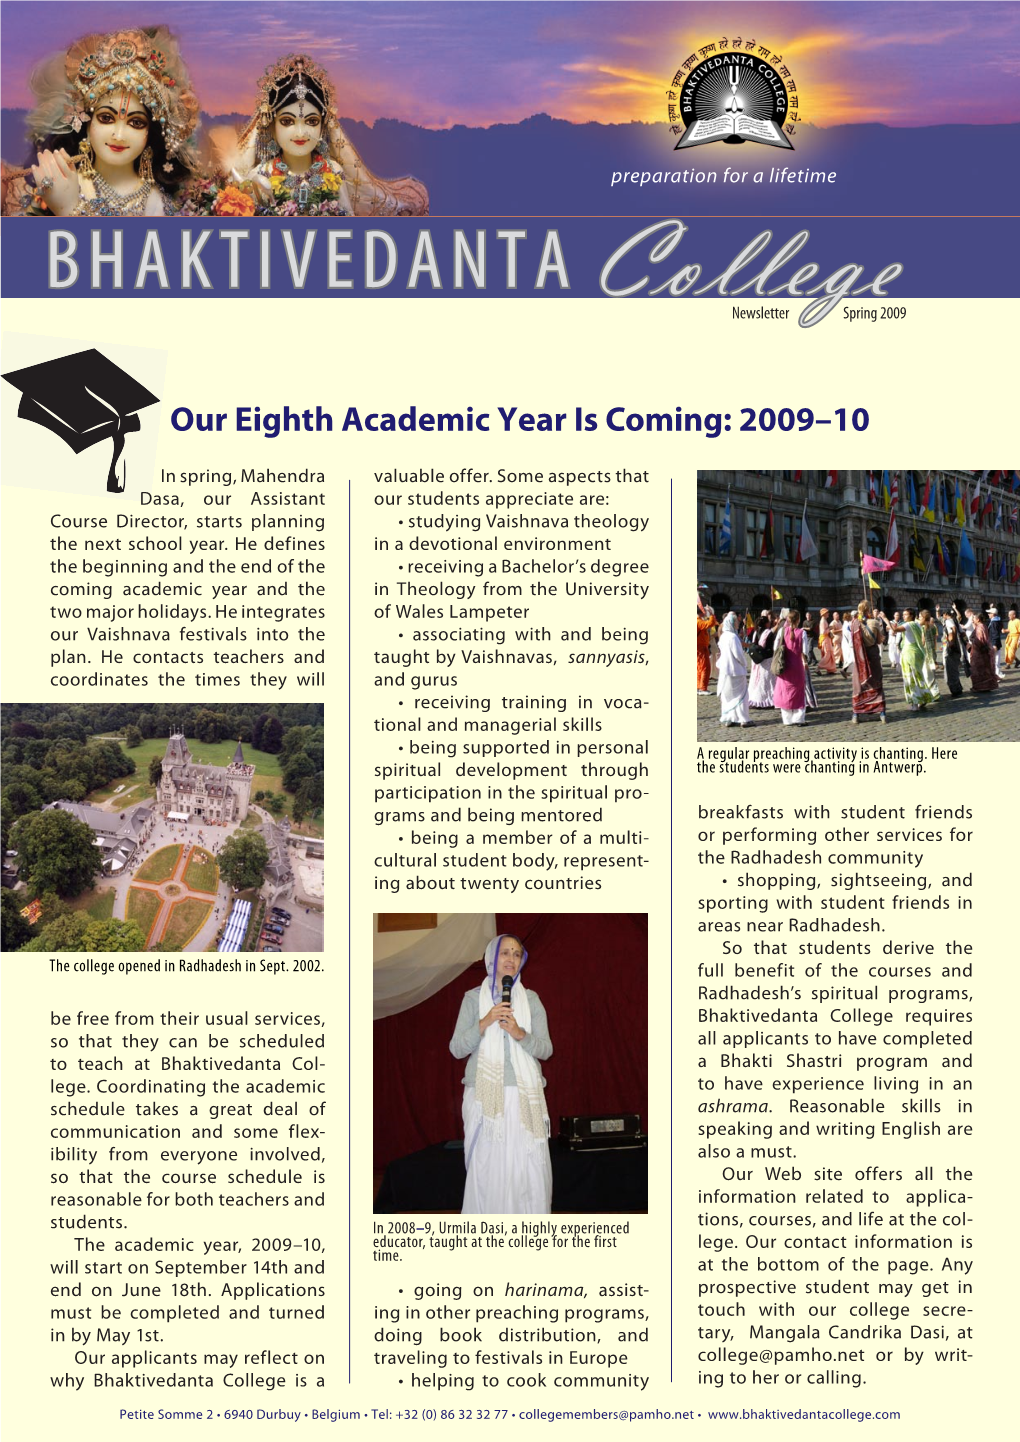 Bhaktivedanta College Requires So That They Can Be Scheduled All Applicants to Have Completed to Teach at Bhaktivedanta Col- a Bhakti Shastri Program and Lege